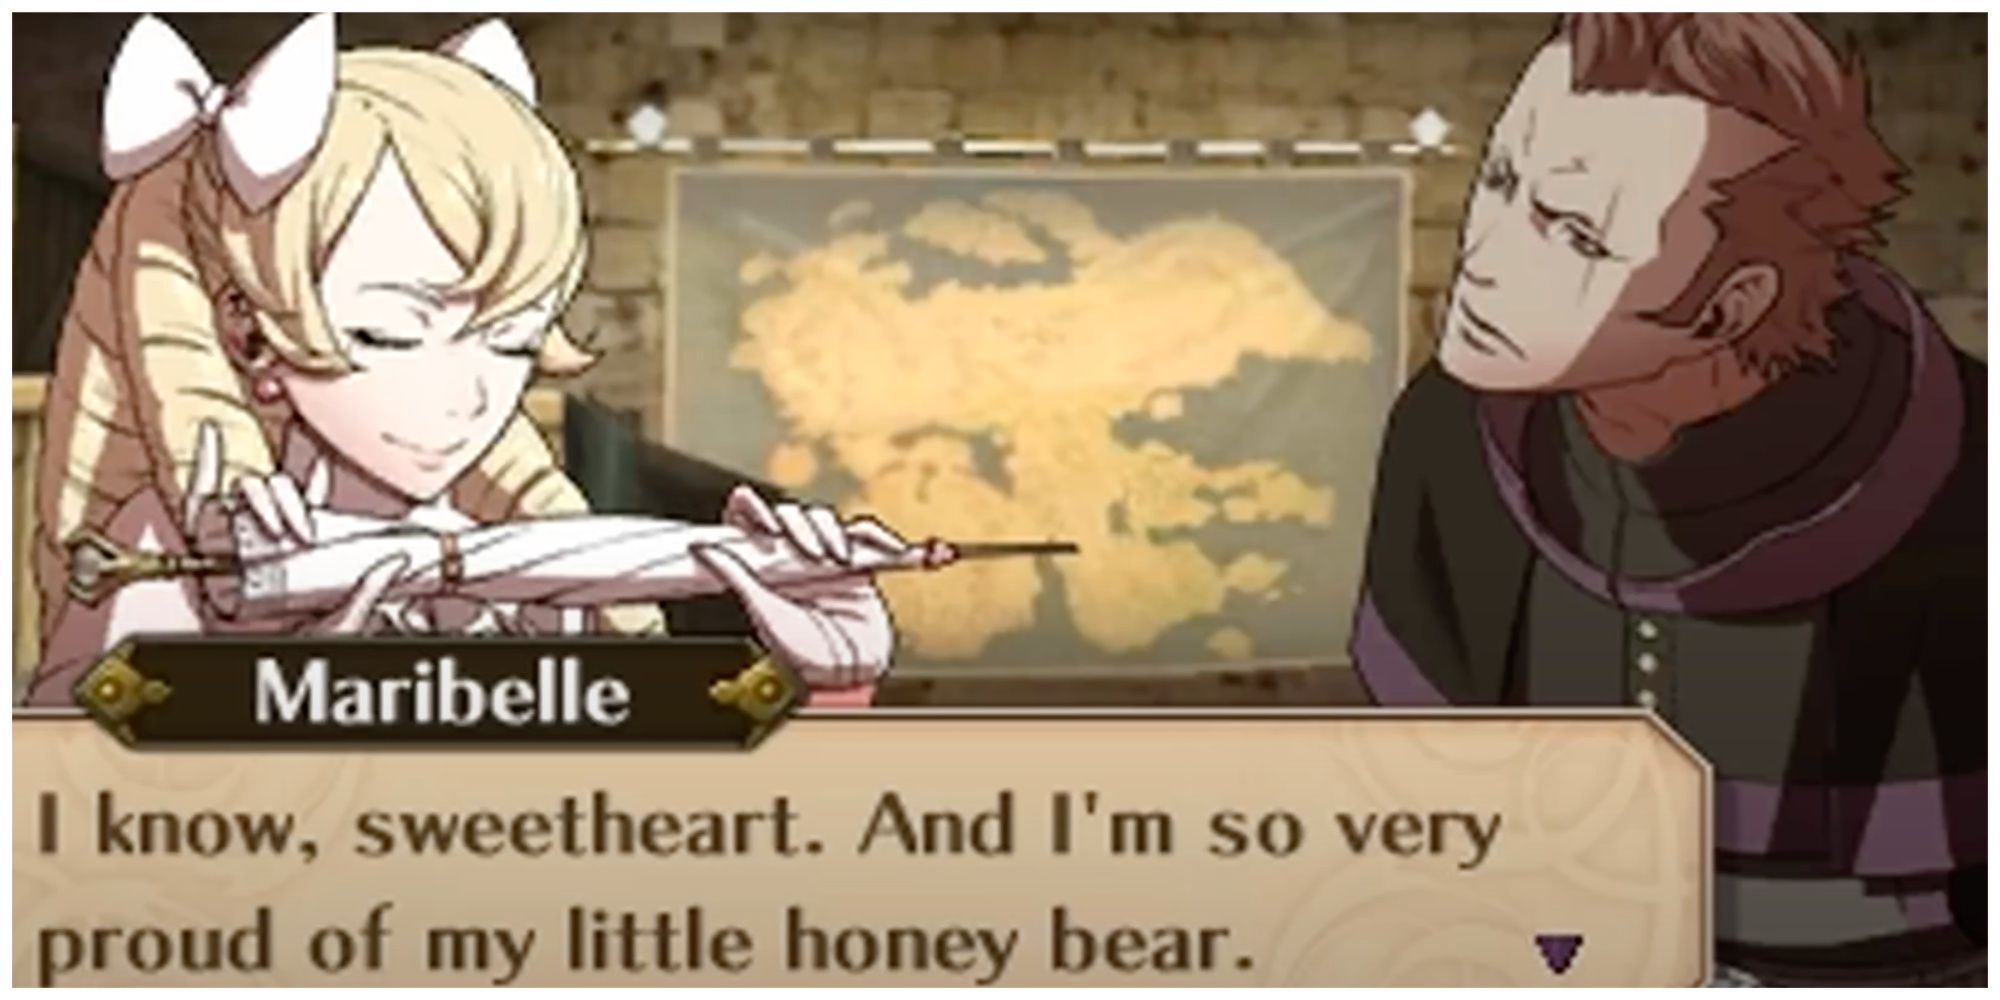 Maribelle talking to Brady, "I know, sweetheart. And I'm so very proud of my little honey bear."